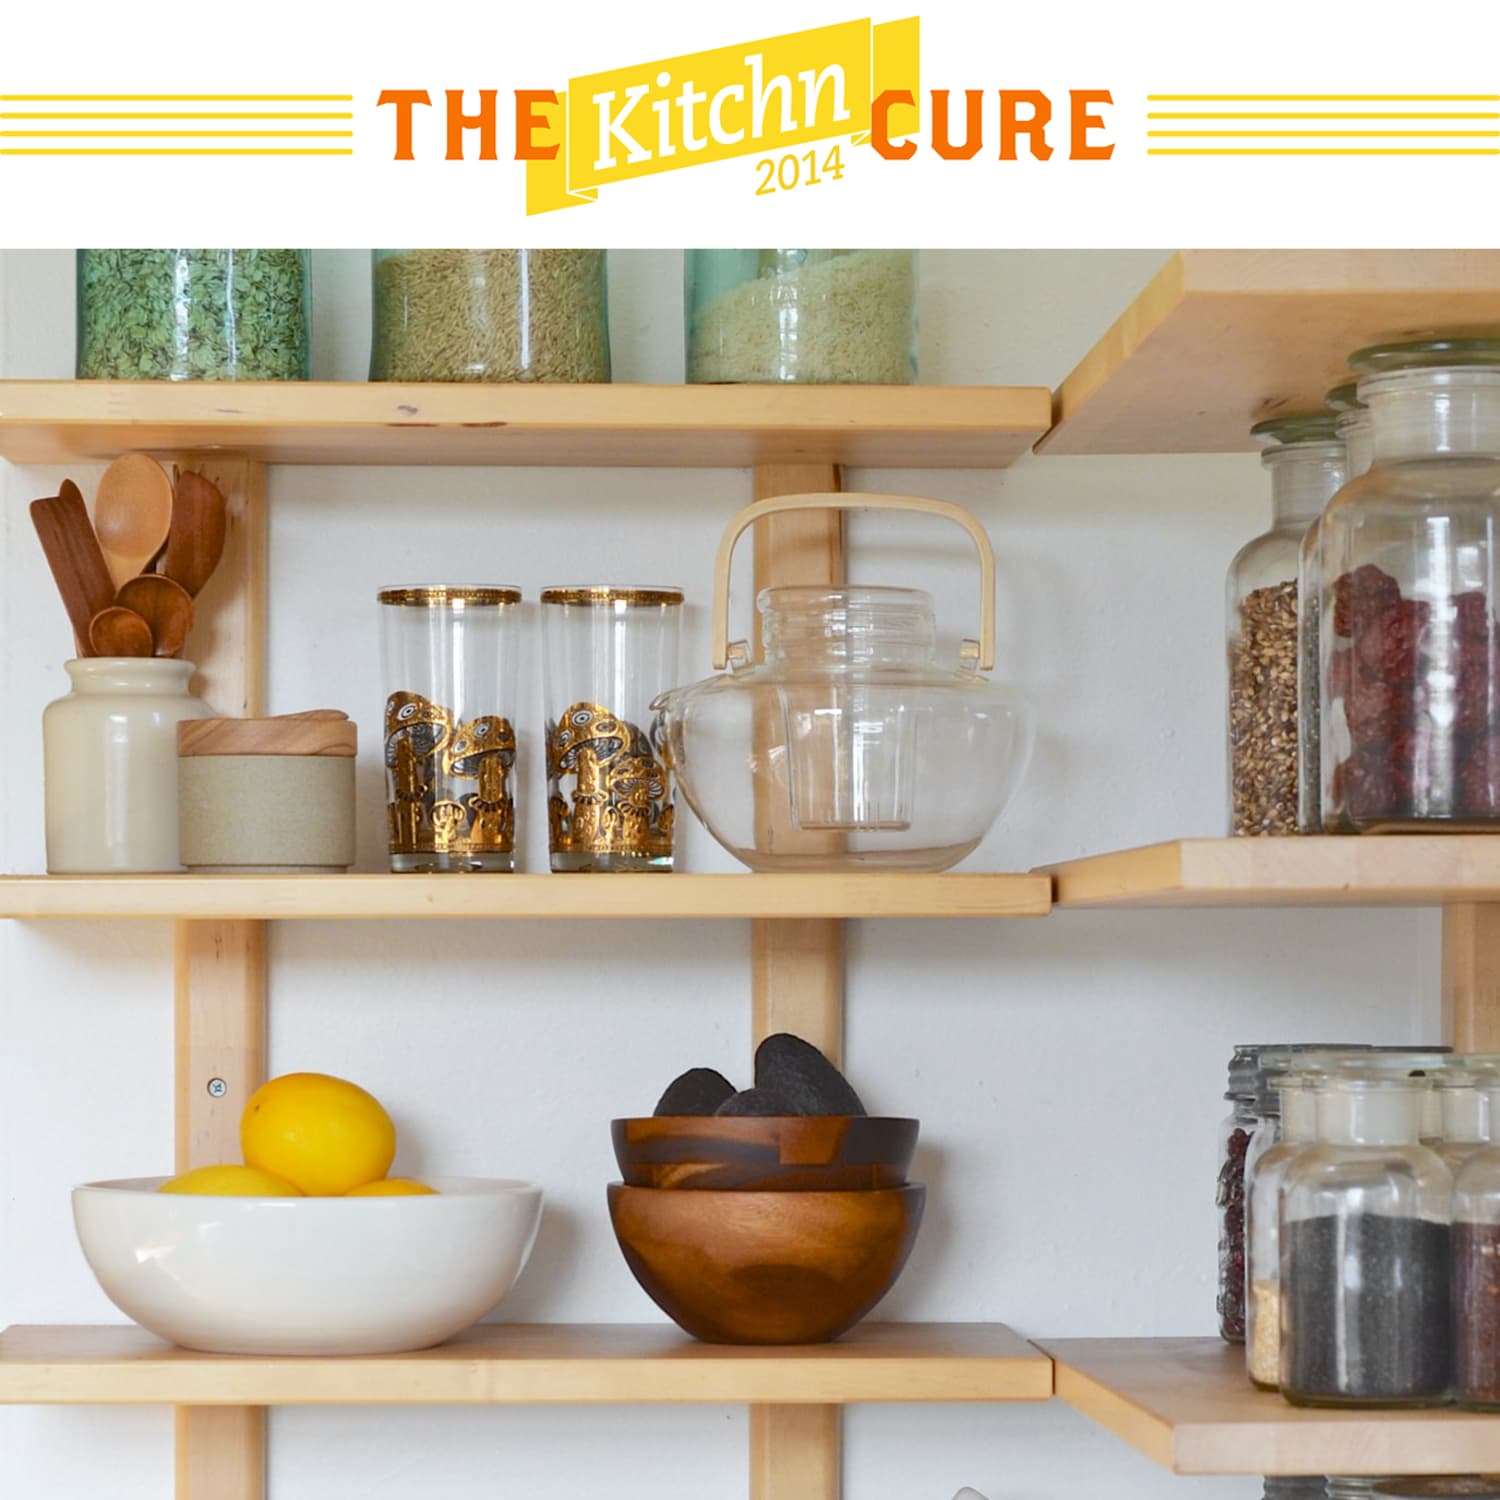 Keep Tidier And More Organized With These Fresh Kitchen Shelves Ideas -  Décor Aid